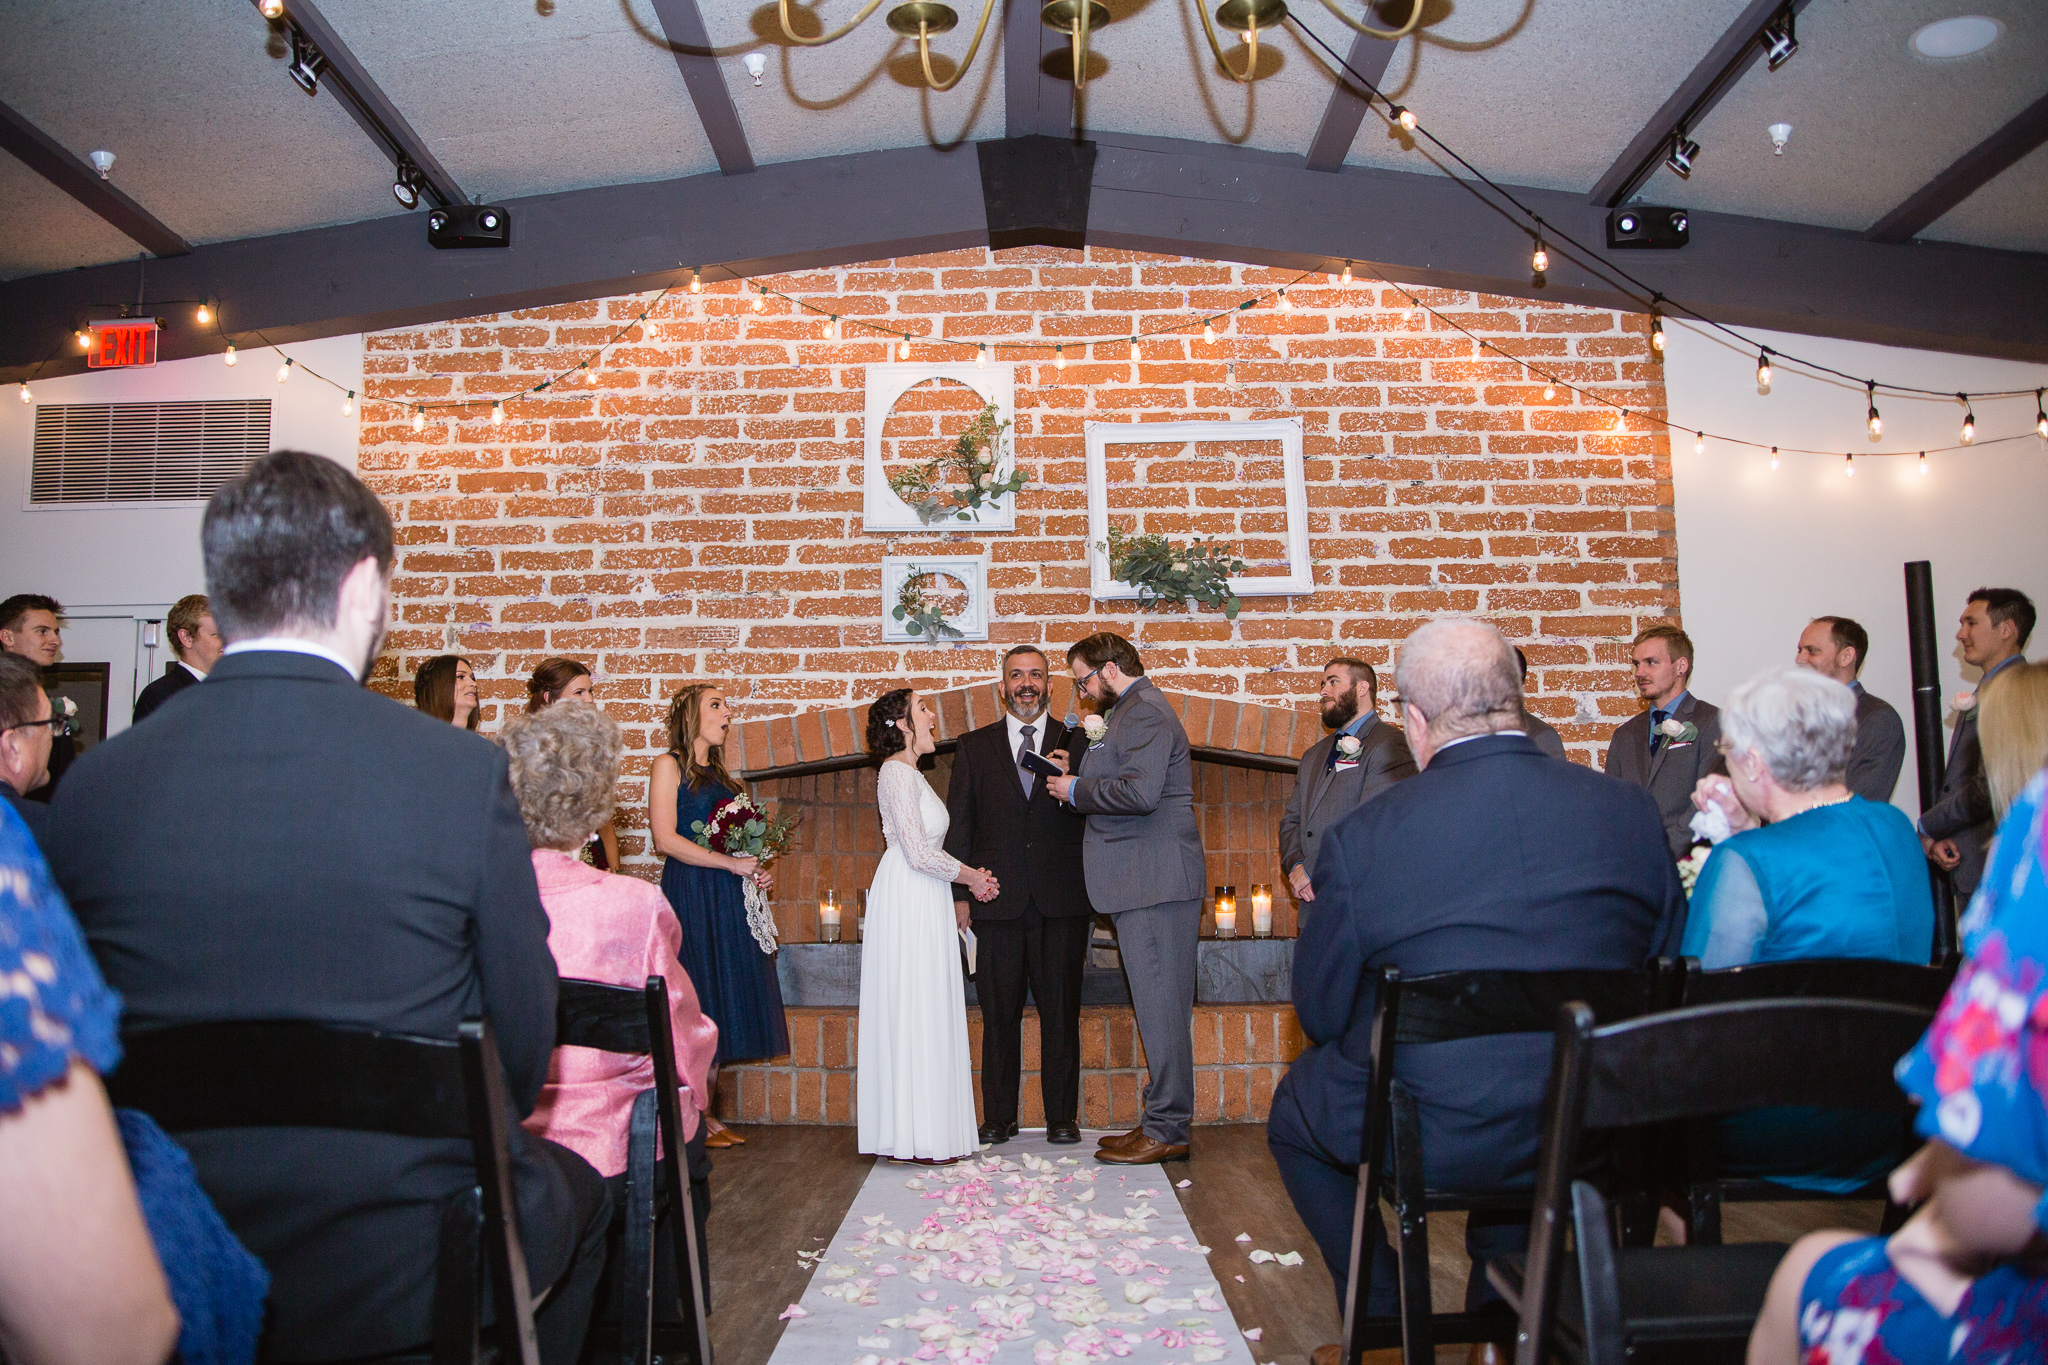 Groom surprising bride and other guest with his personal vows during their wedding ceremony.